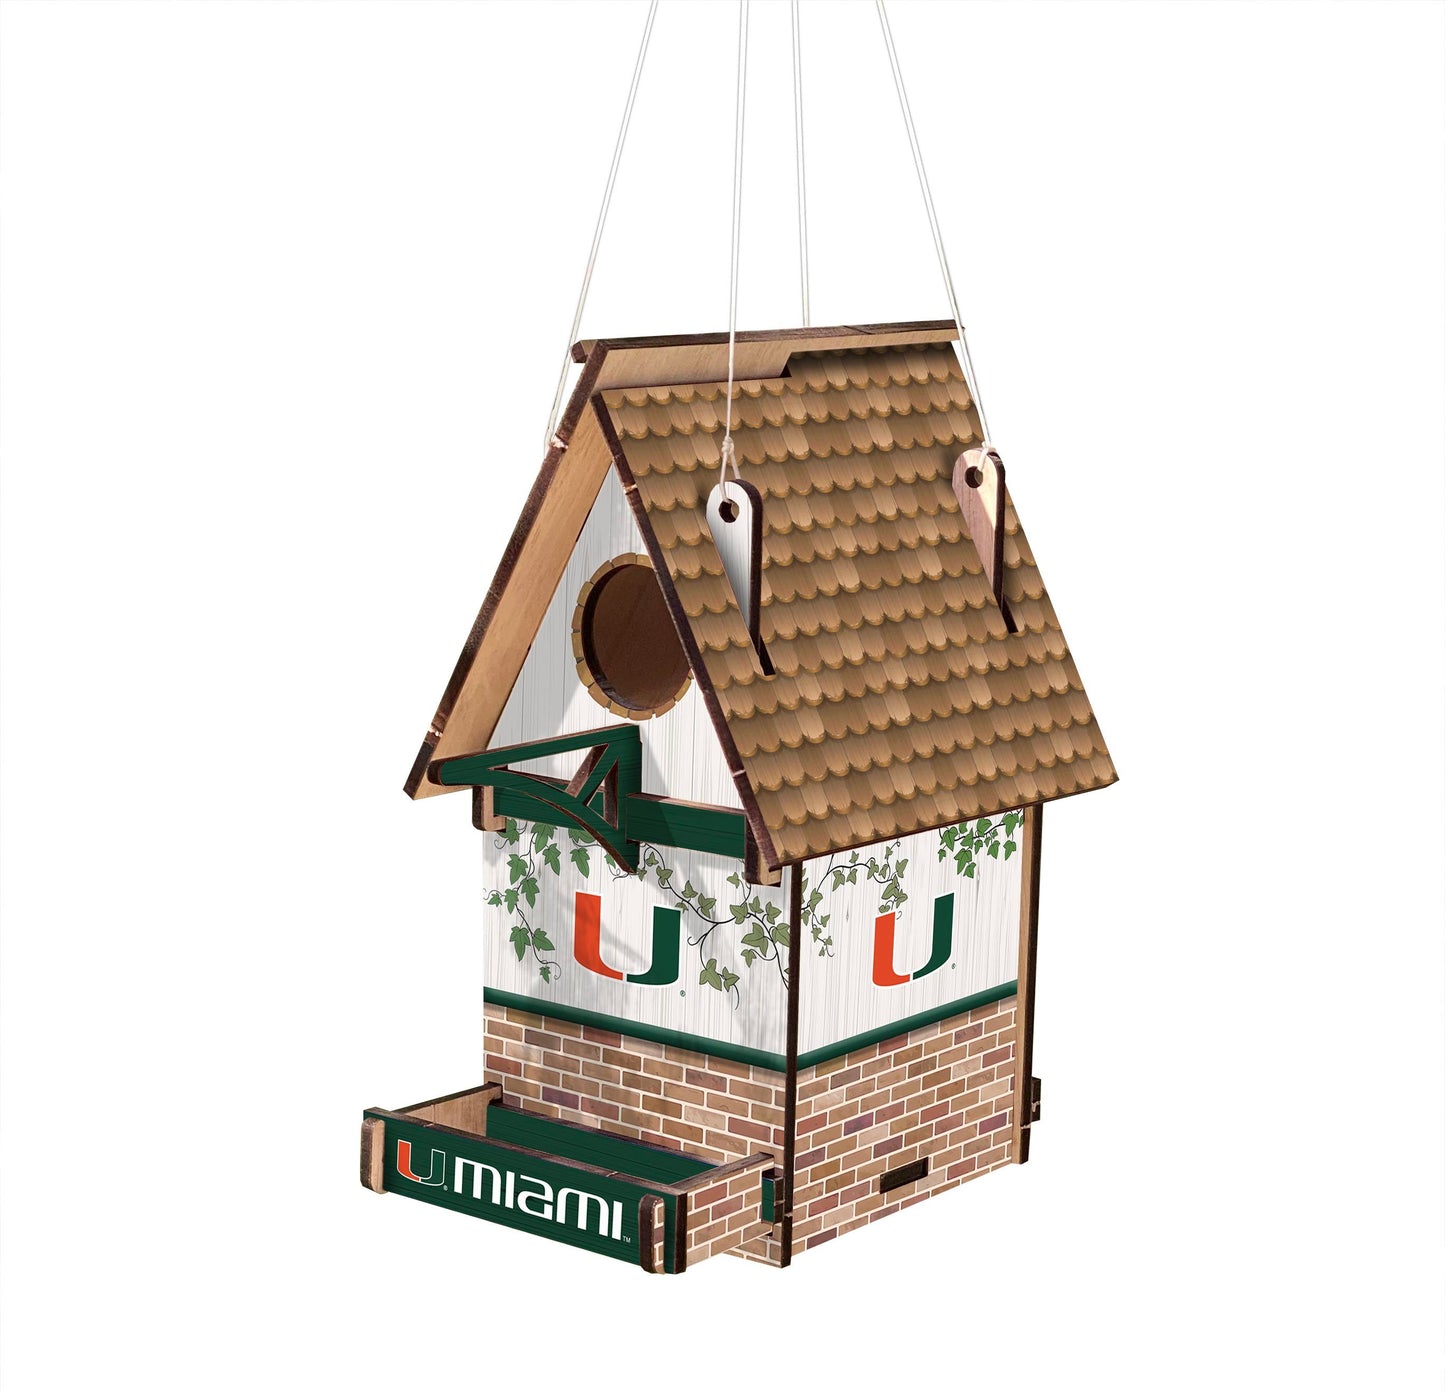 Miami Hurricanes Wood Birdhouse: Team colors, logo. Perfect fan decor for both the game and the garden. Ideal for bird-loving enthusiasts